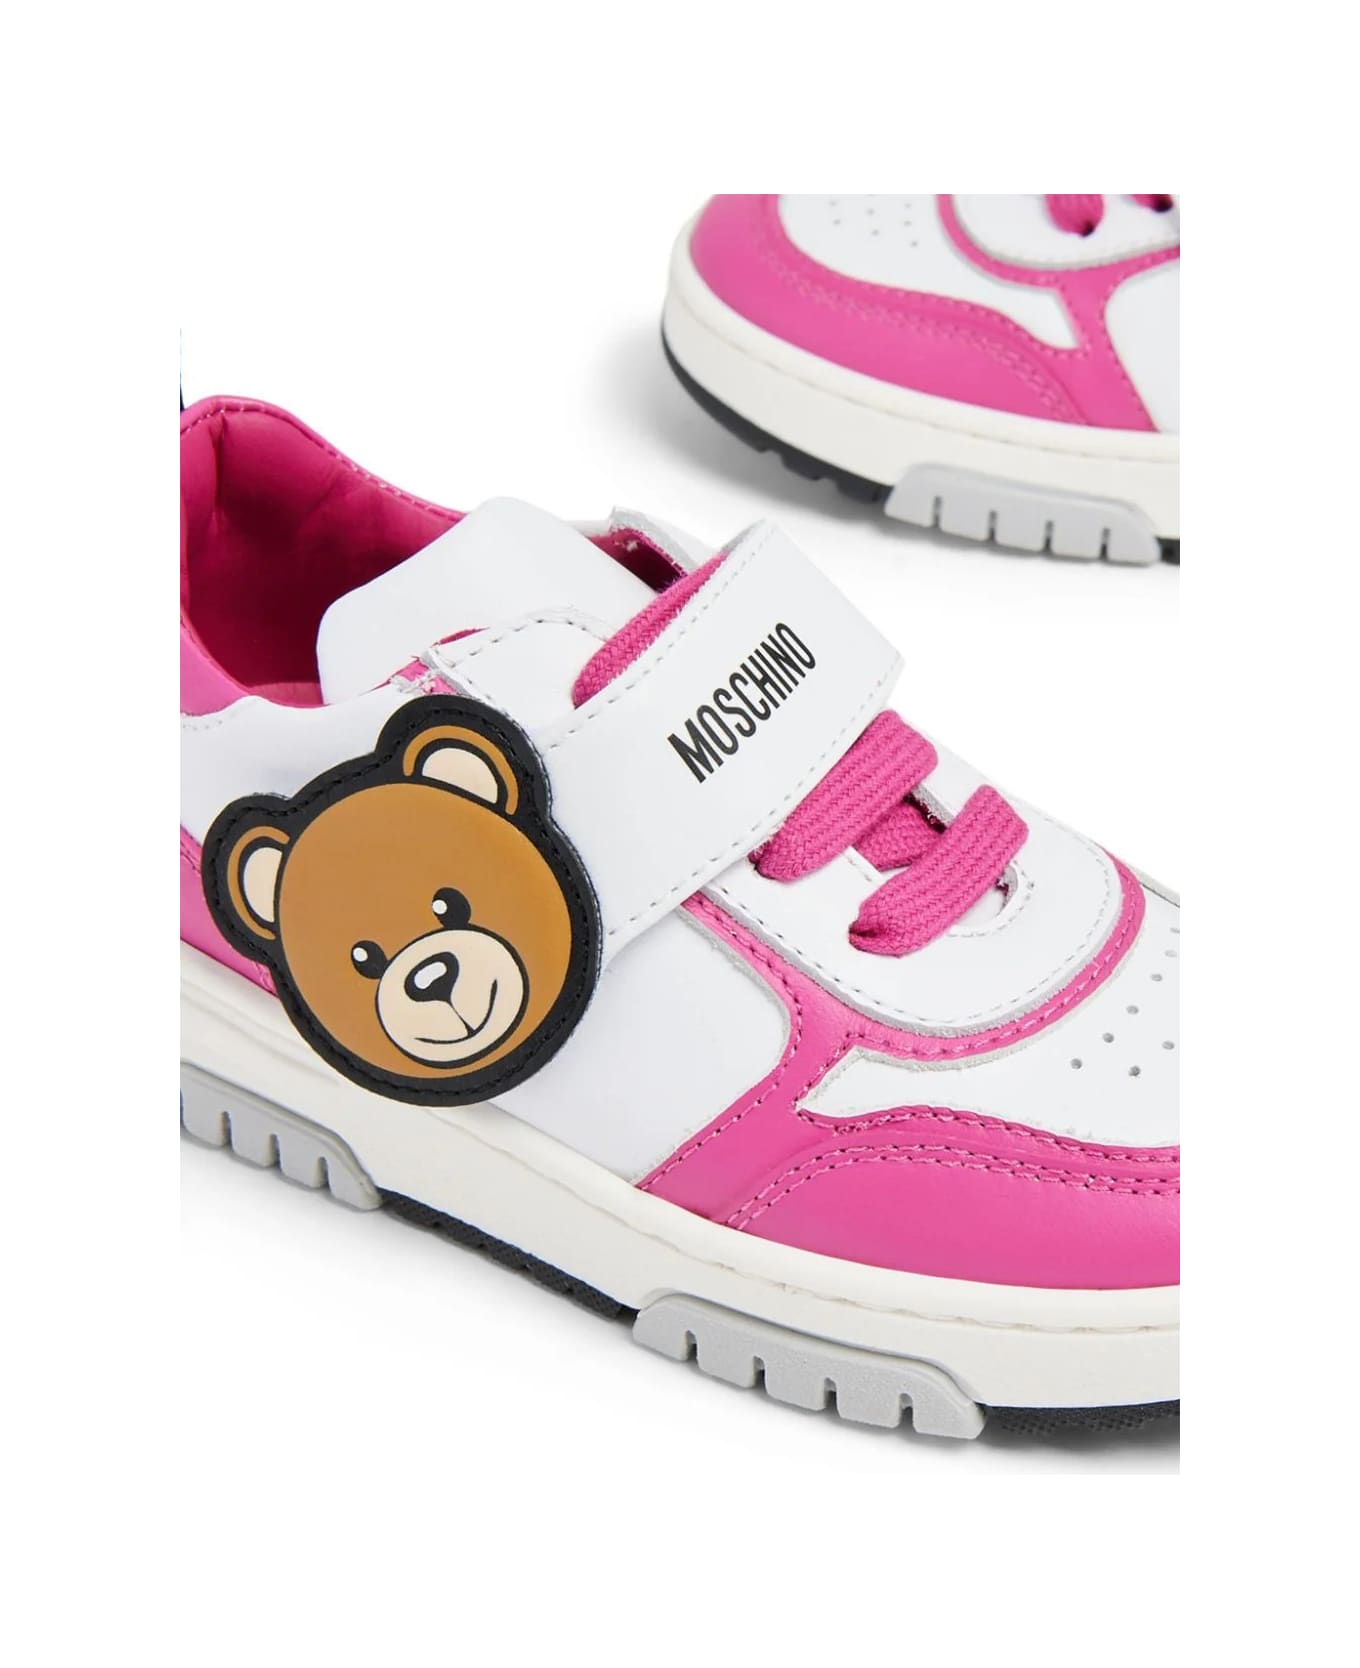 Moschino Teddy Bear Sneakers - Pink